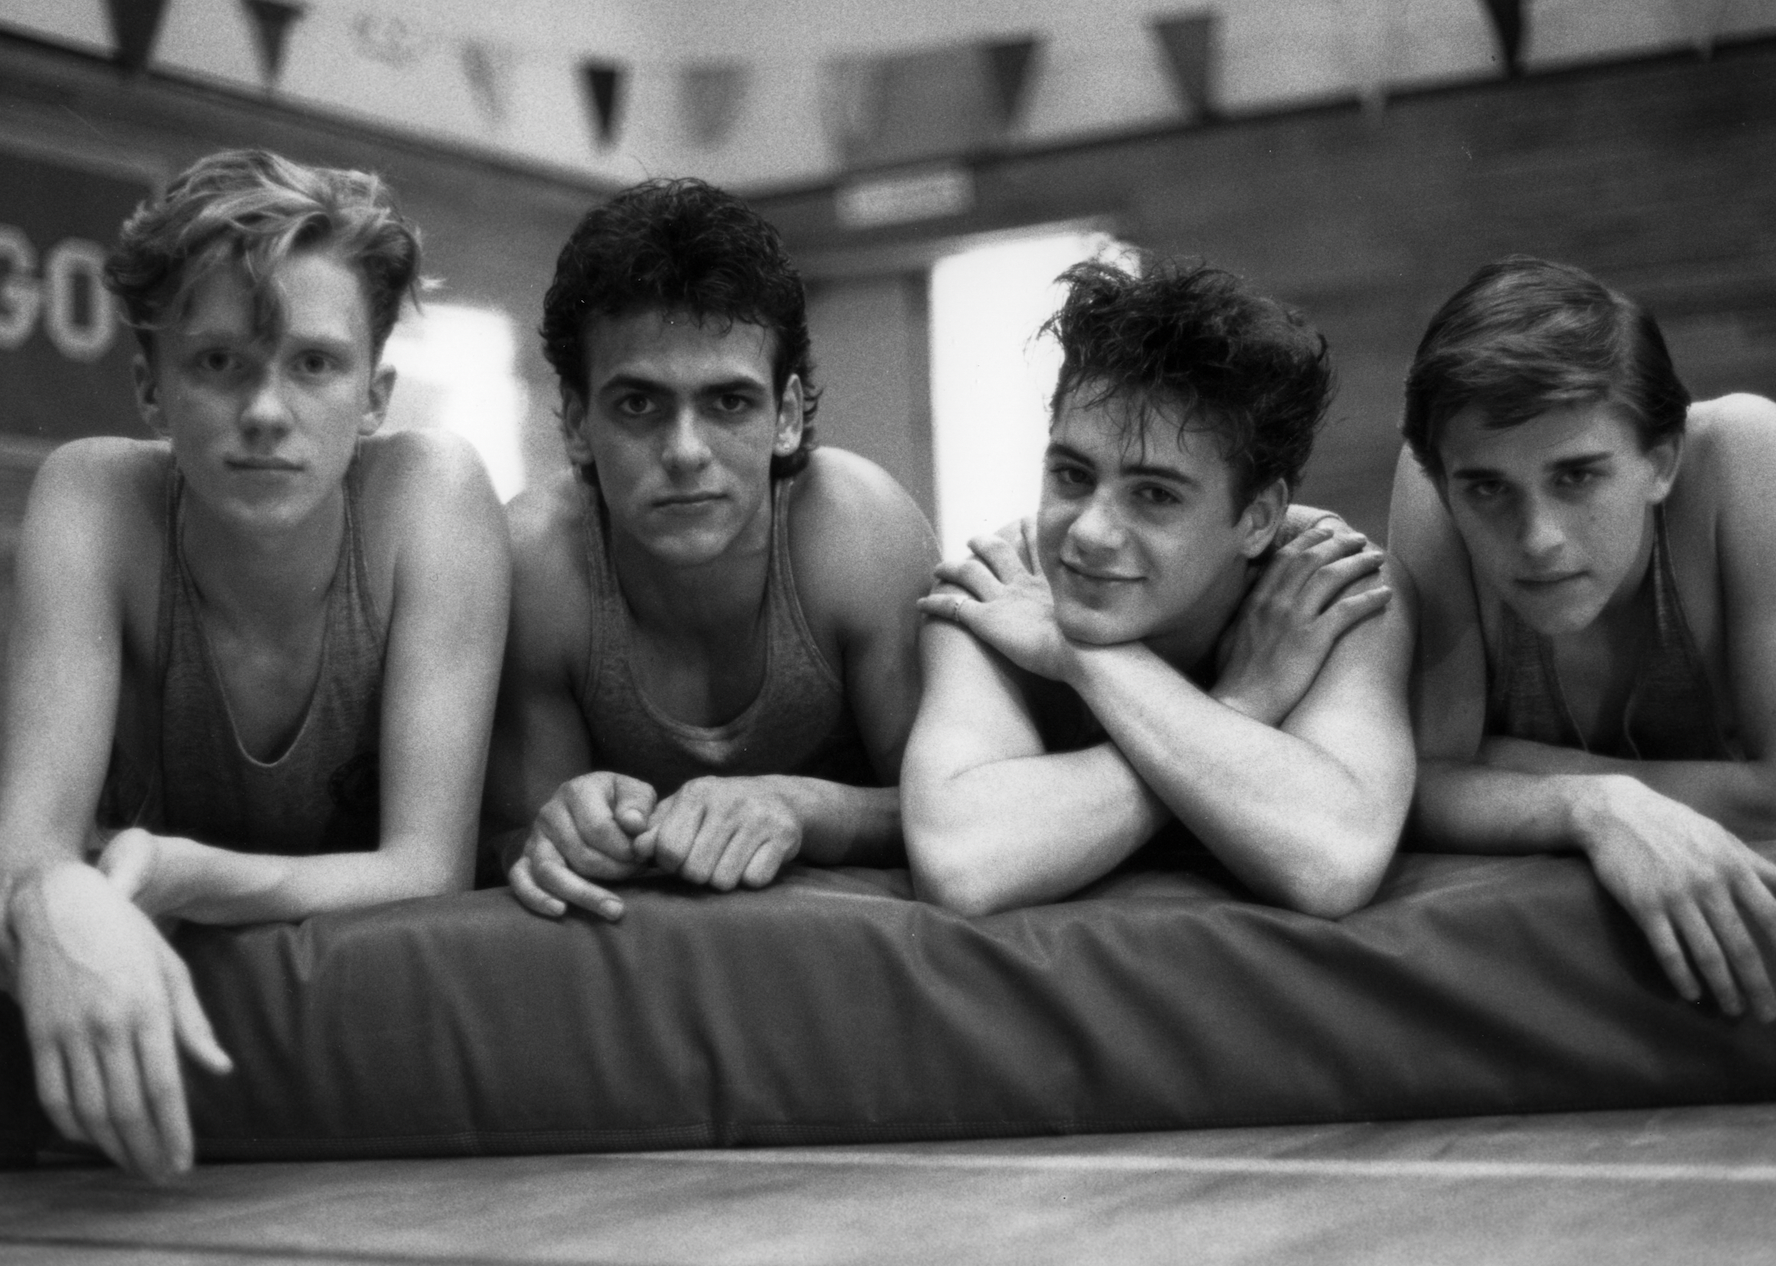 Anthony Michael Hall, Robert Rusler , Robert Downey Jr. and Ilan Mitchell-Smith pose for the movie "Weird Science".